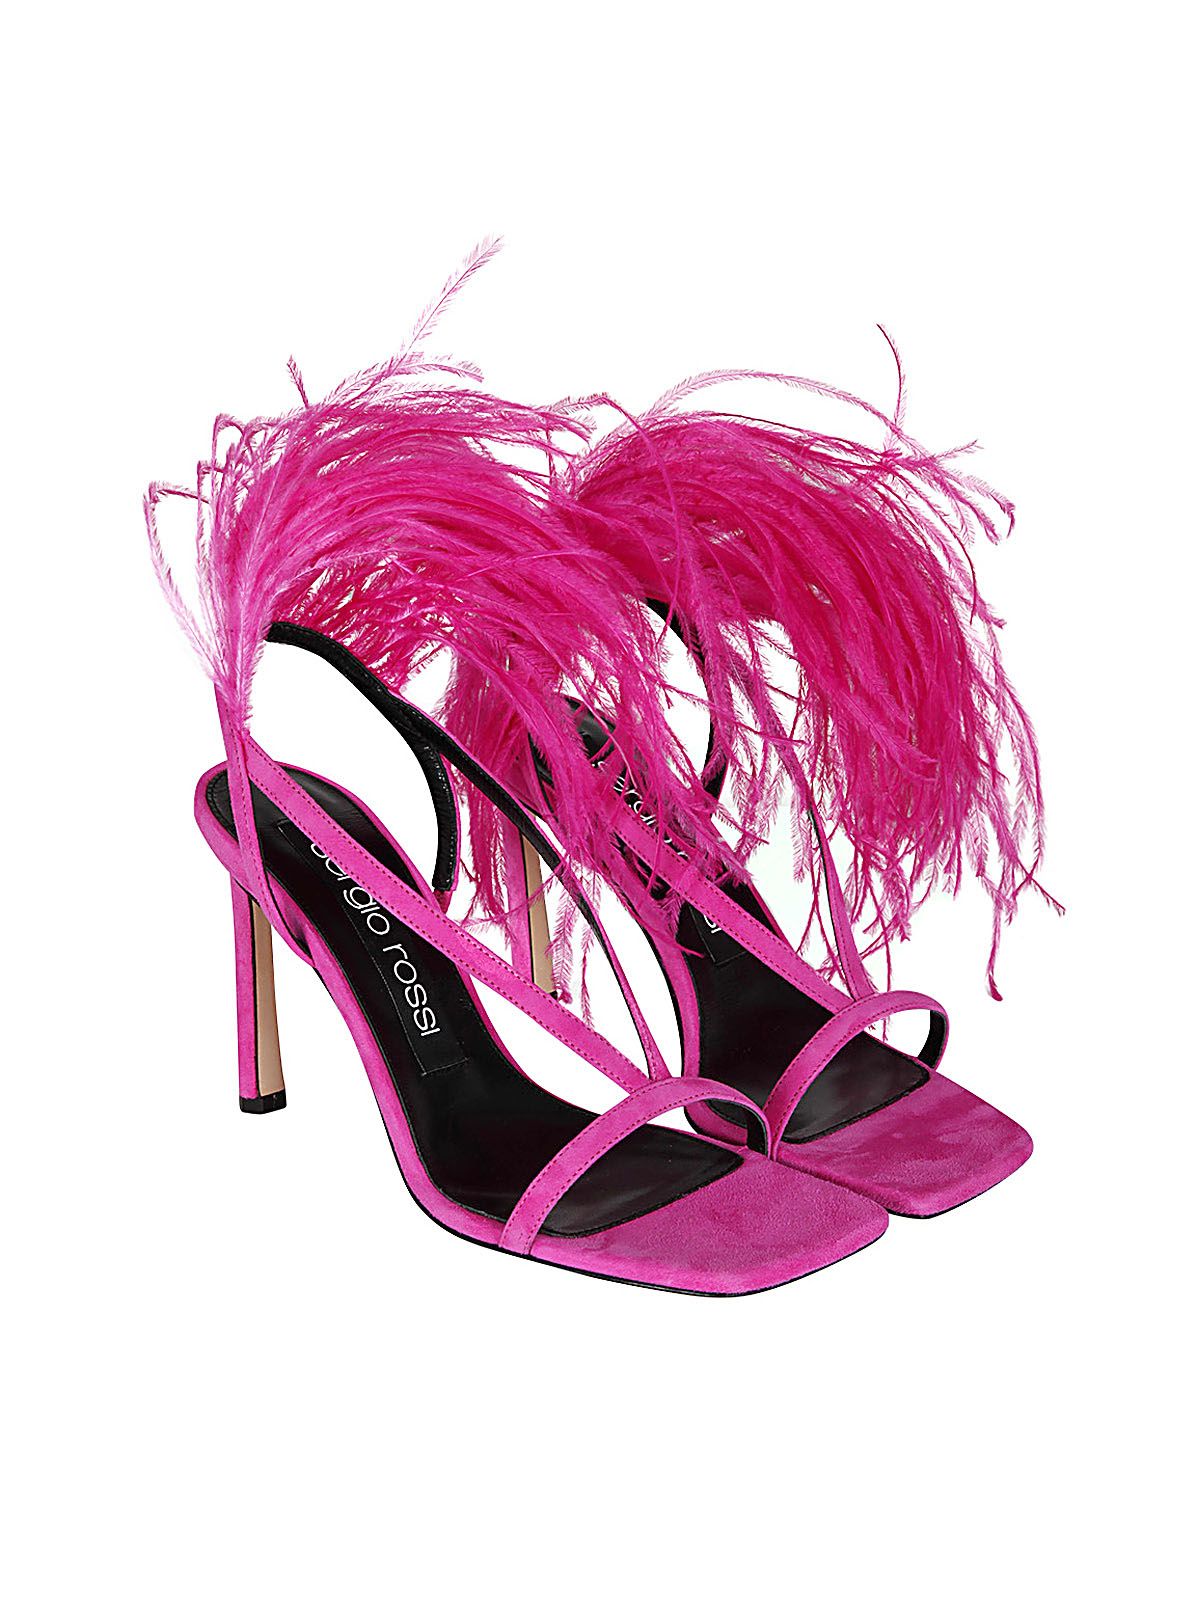 Shop Sergio Rossi Pink Sandals With Feathers | Bernardellistores.com